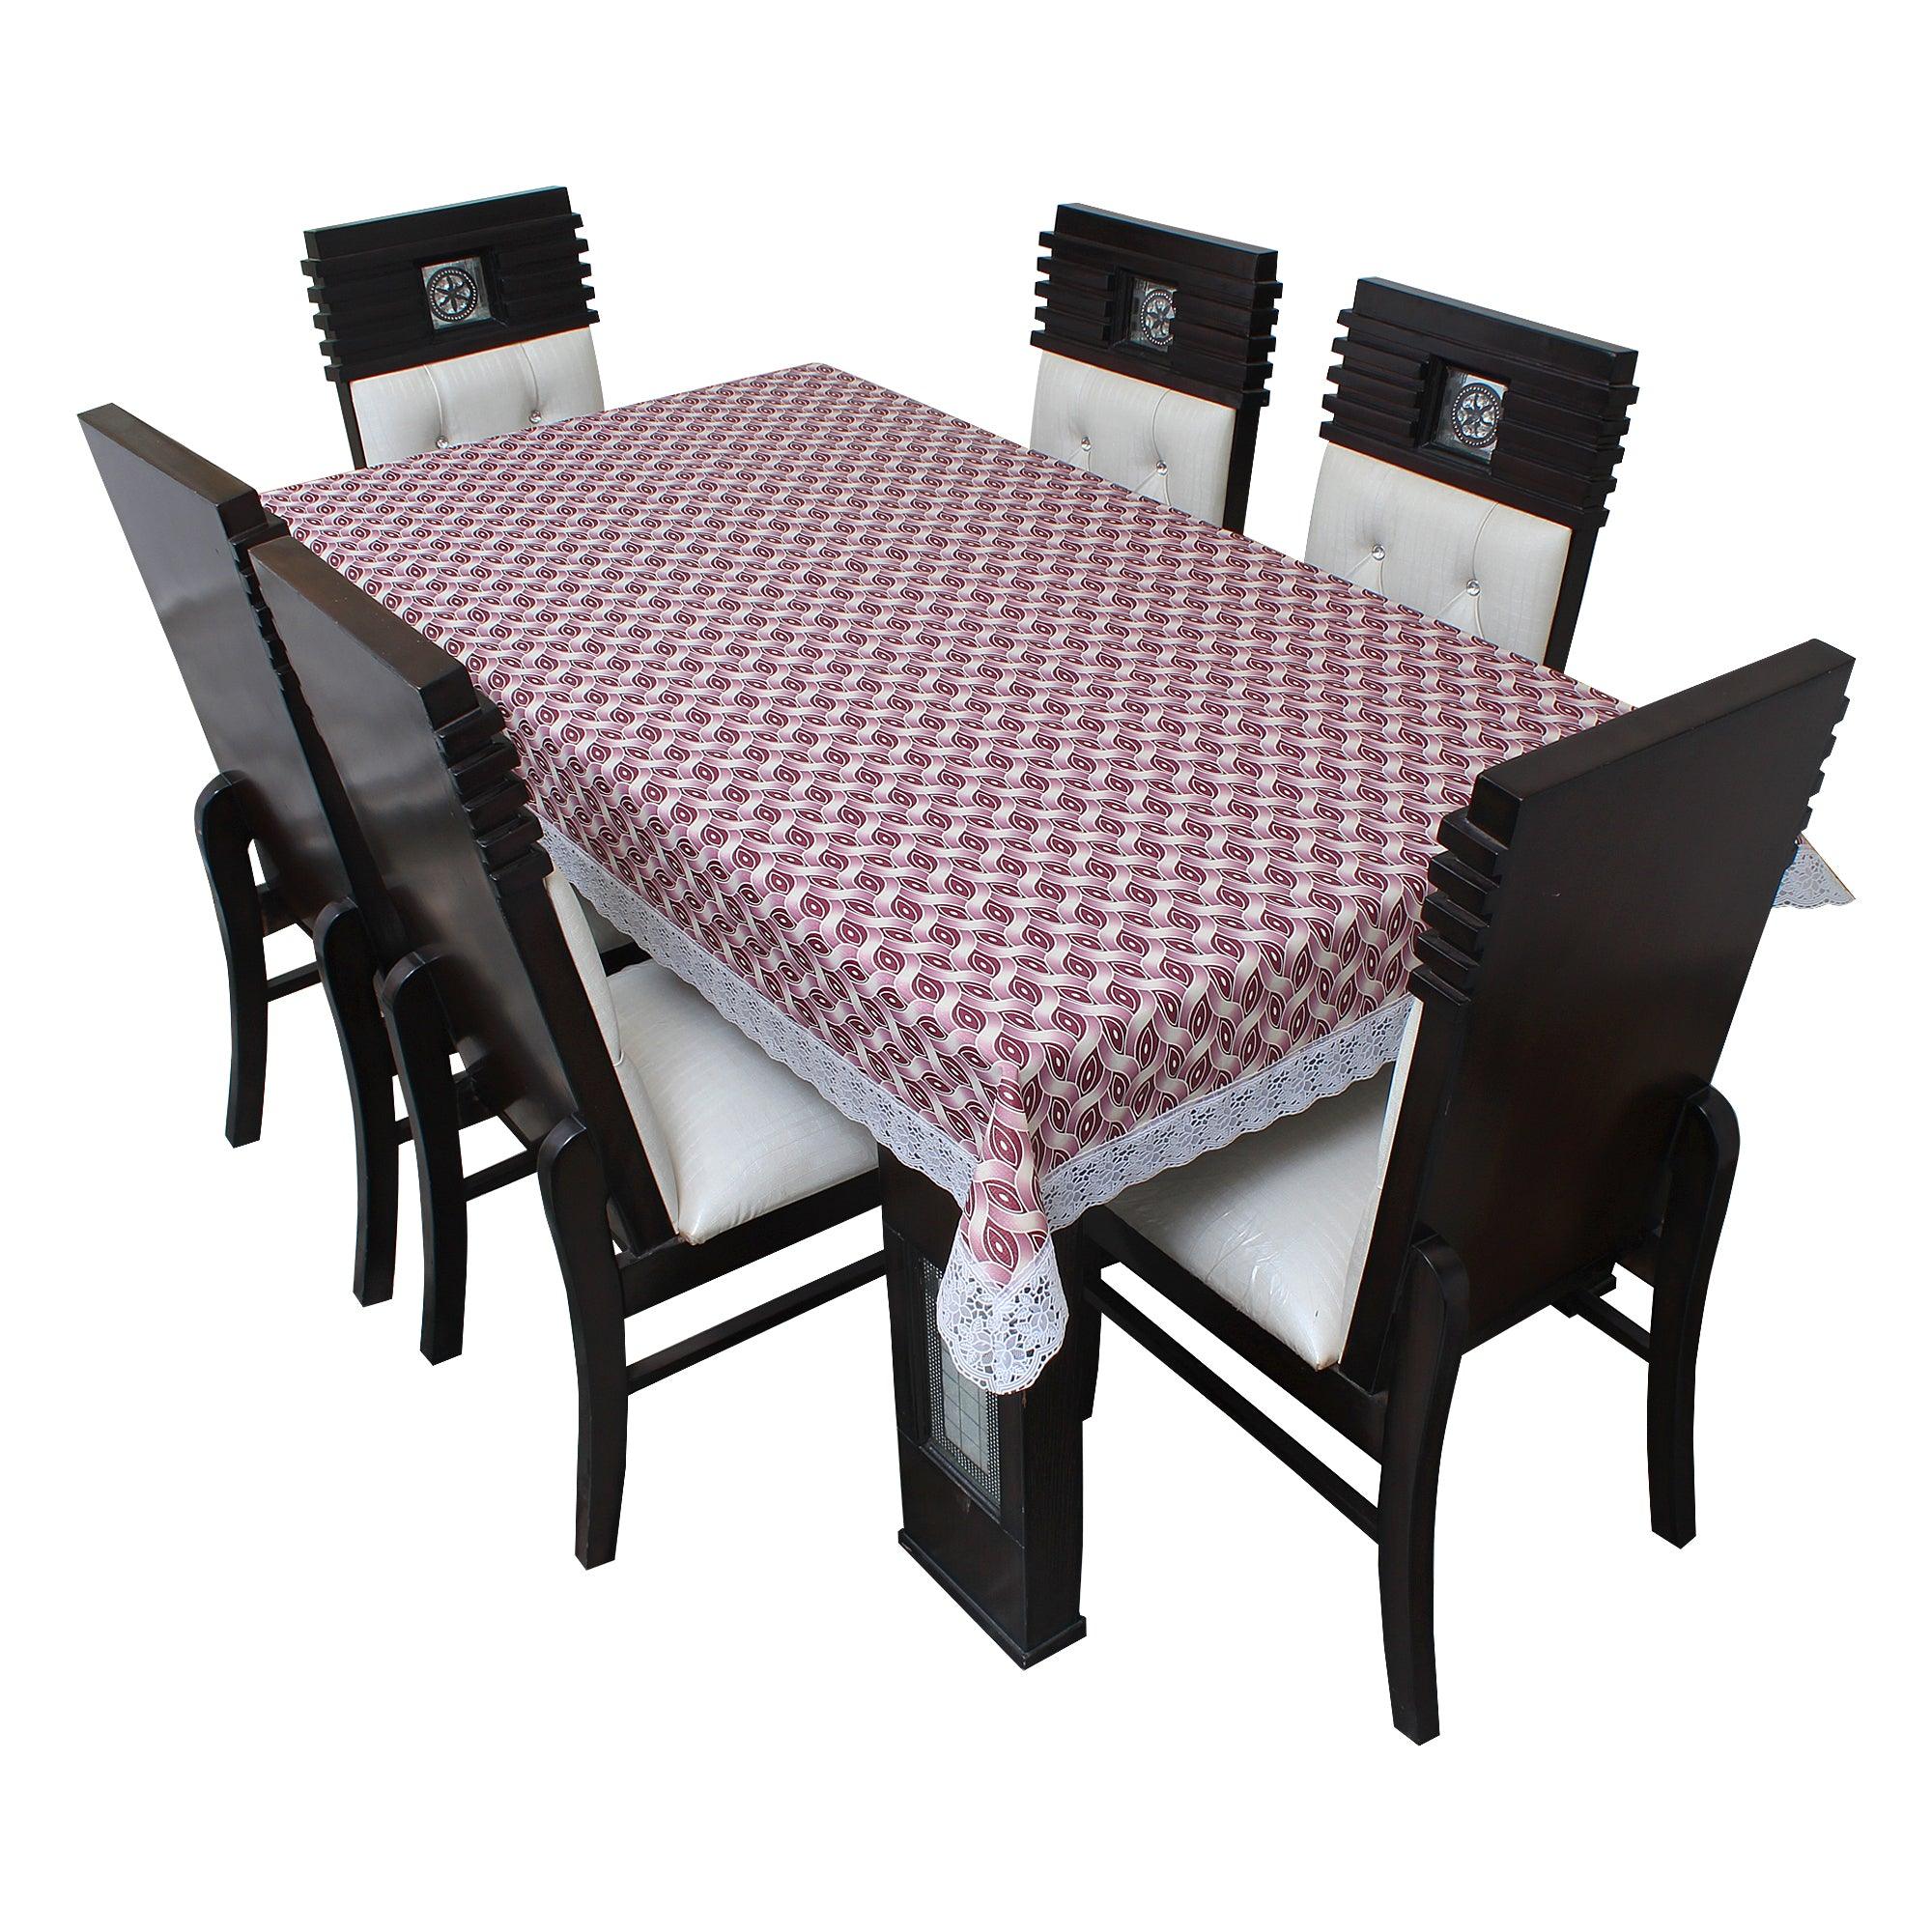 Waterproof and Dustproof Dining Table Cover, SA64 - Dream Care Furnishings Private Limited